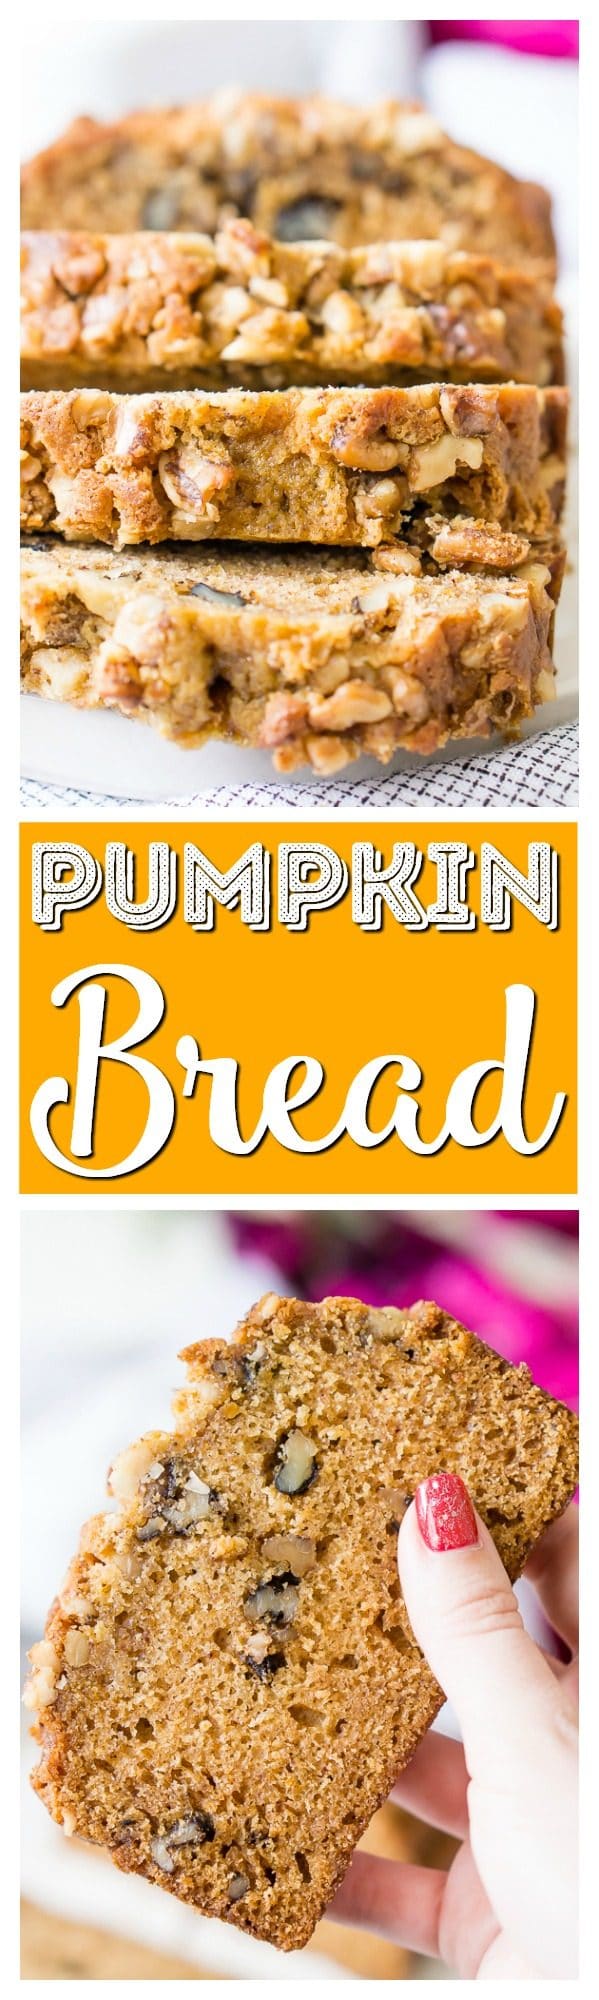 This Spiced Pumpkin Bread Recipe is loaded with amazing spices and chopped walnuts, it's the perfect quick bread for fall!